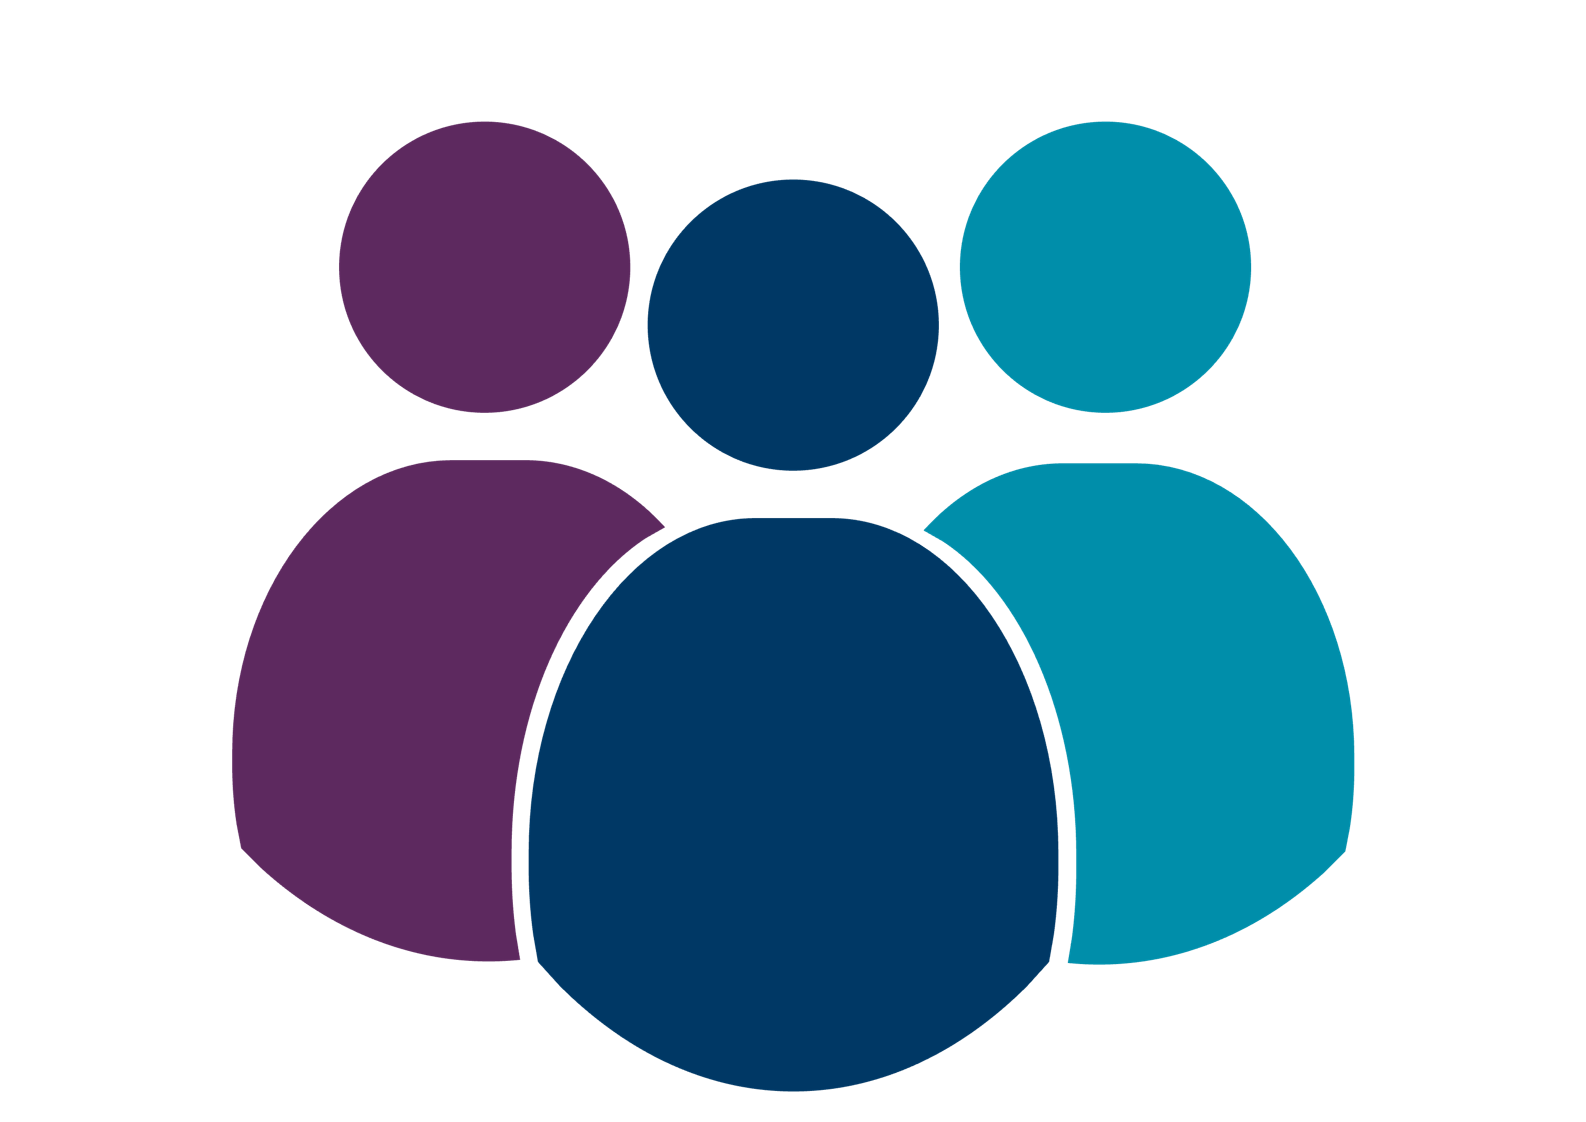 Icon of three people, one purple, one dark blue, and one light blue